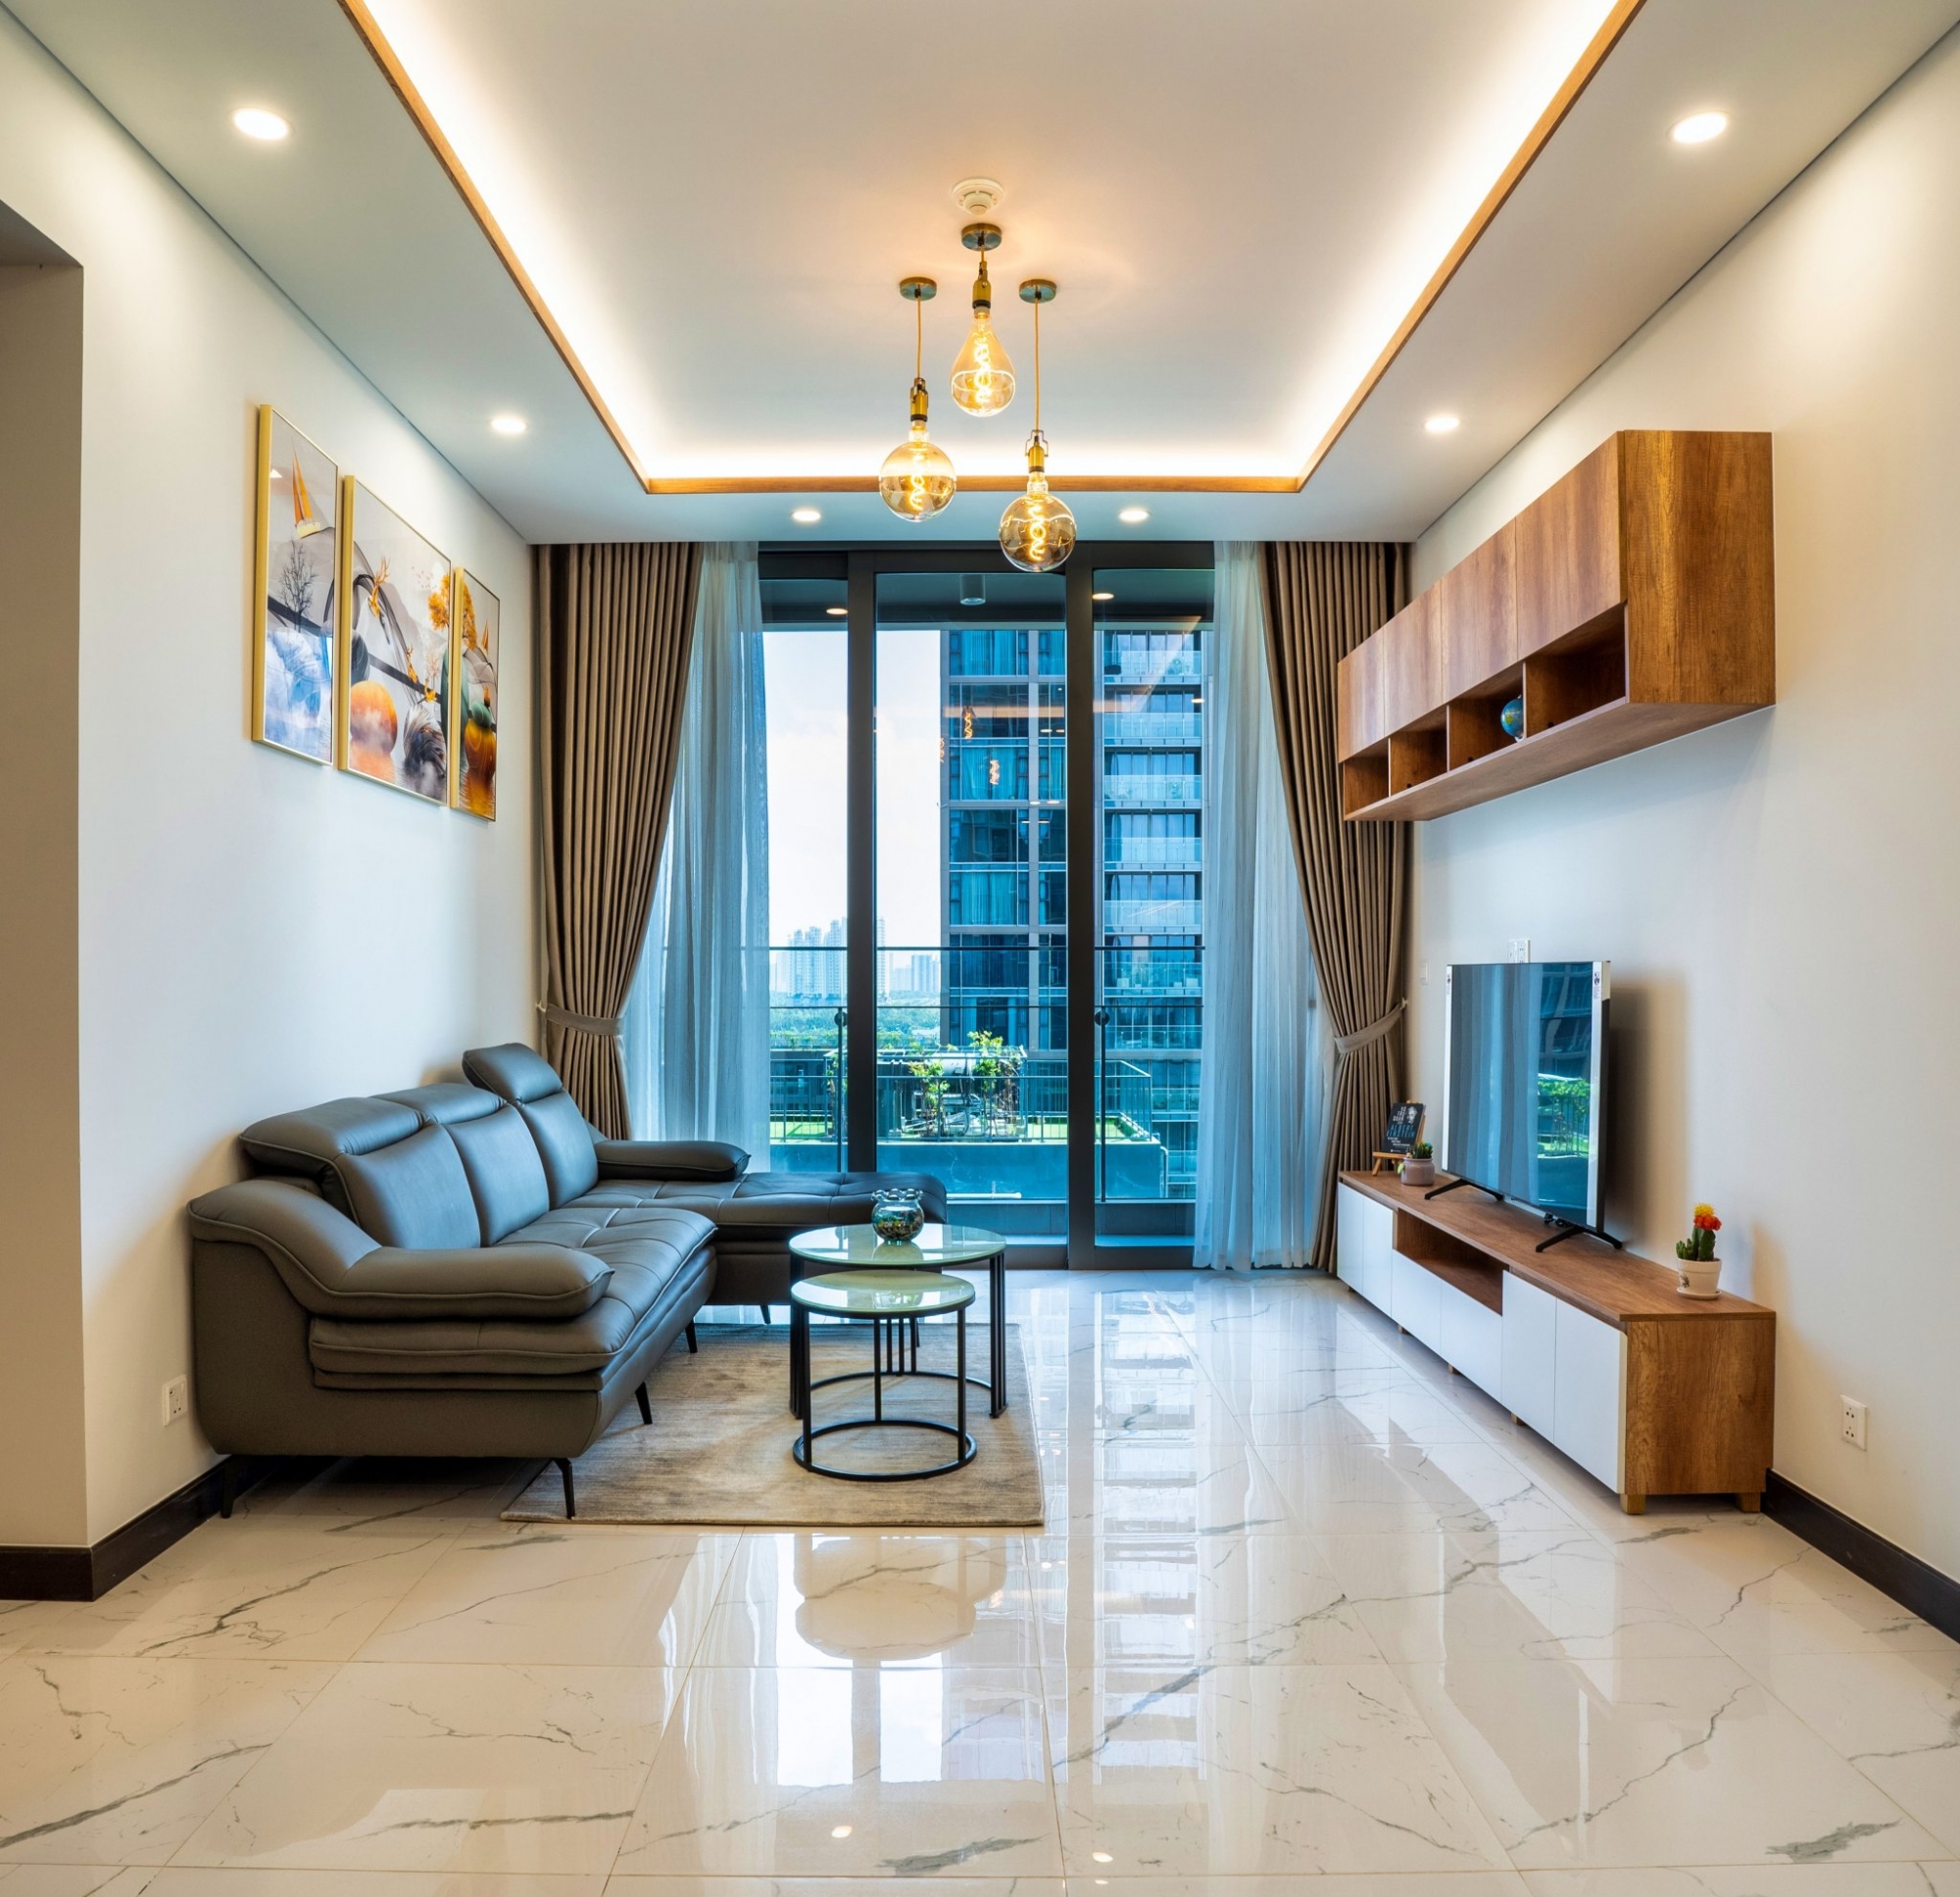 2 bedrooms with full furniture for rent in Tilia Residences - Empire City